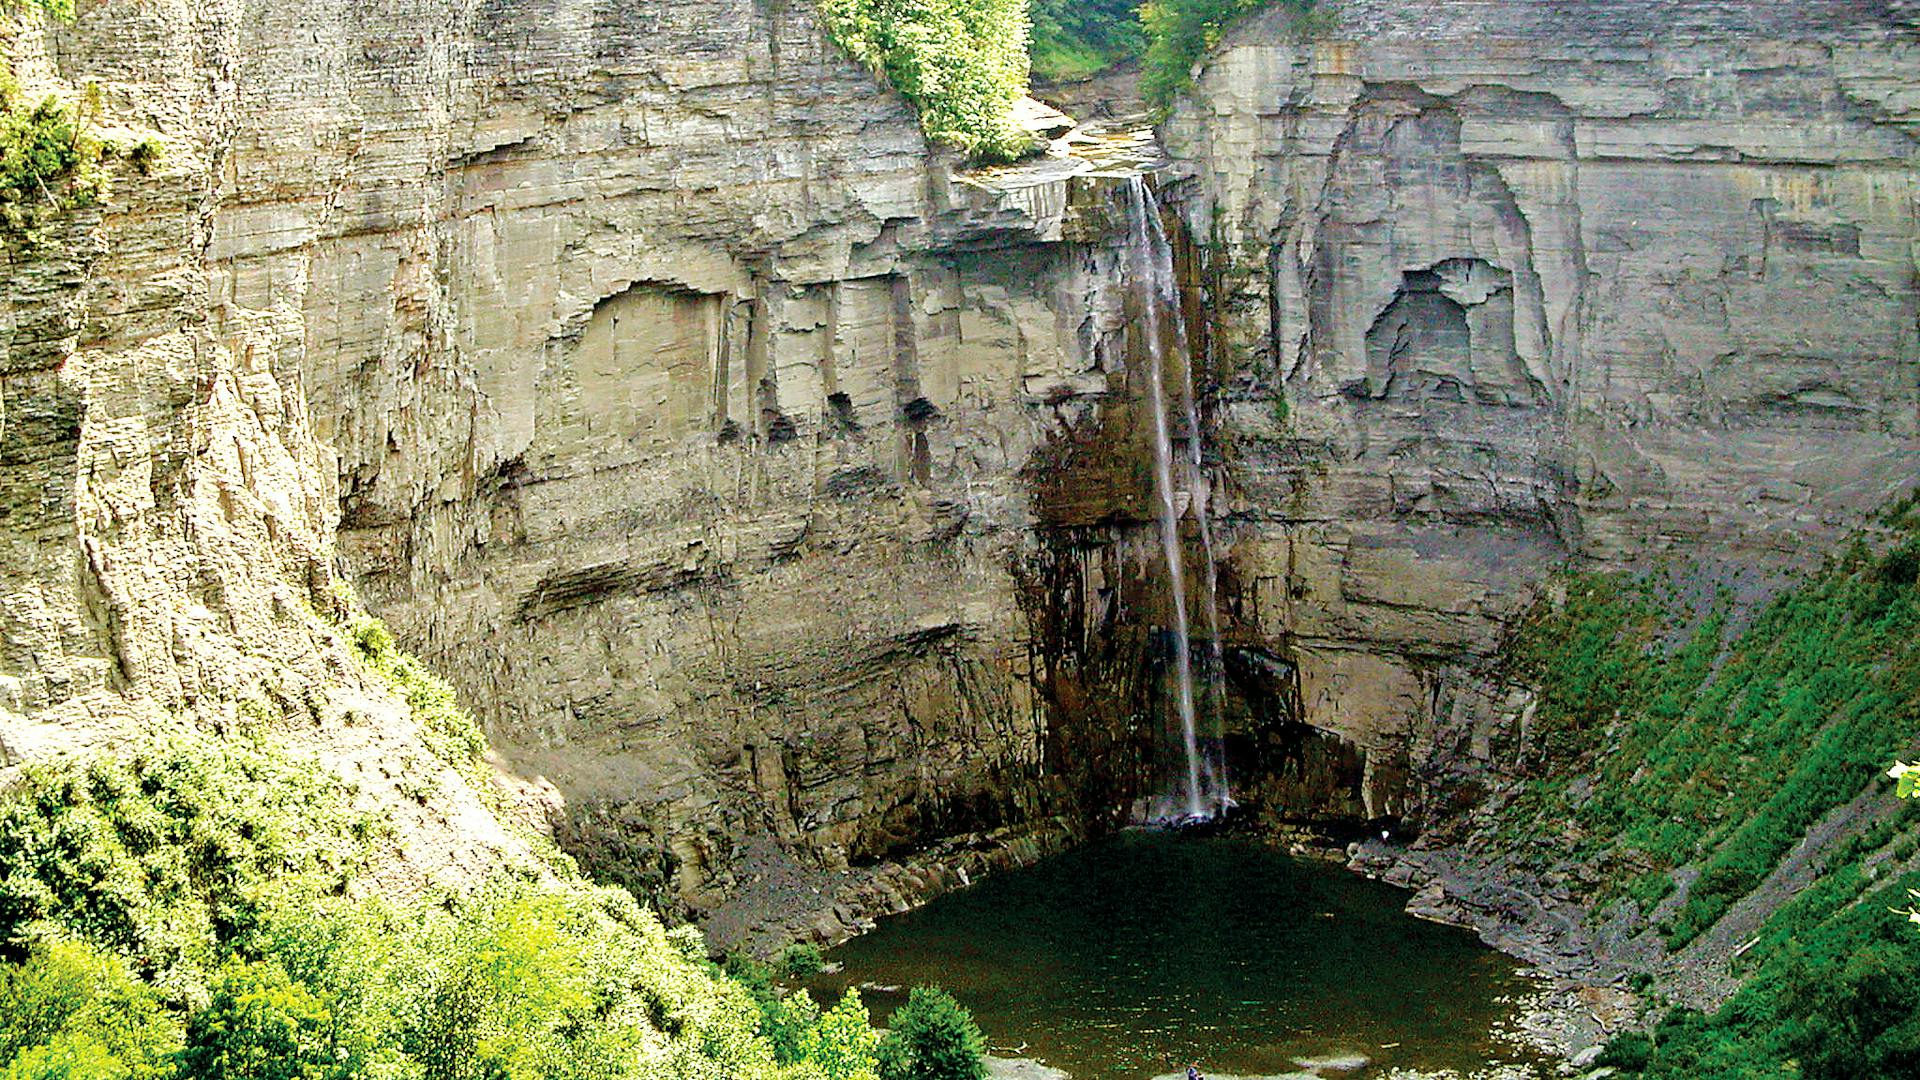 Taughannock Falls State Park in Trumansburg, New York (photo courtesy of destionation)